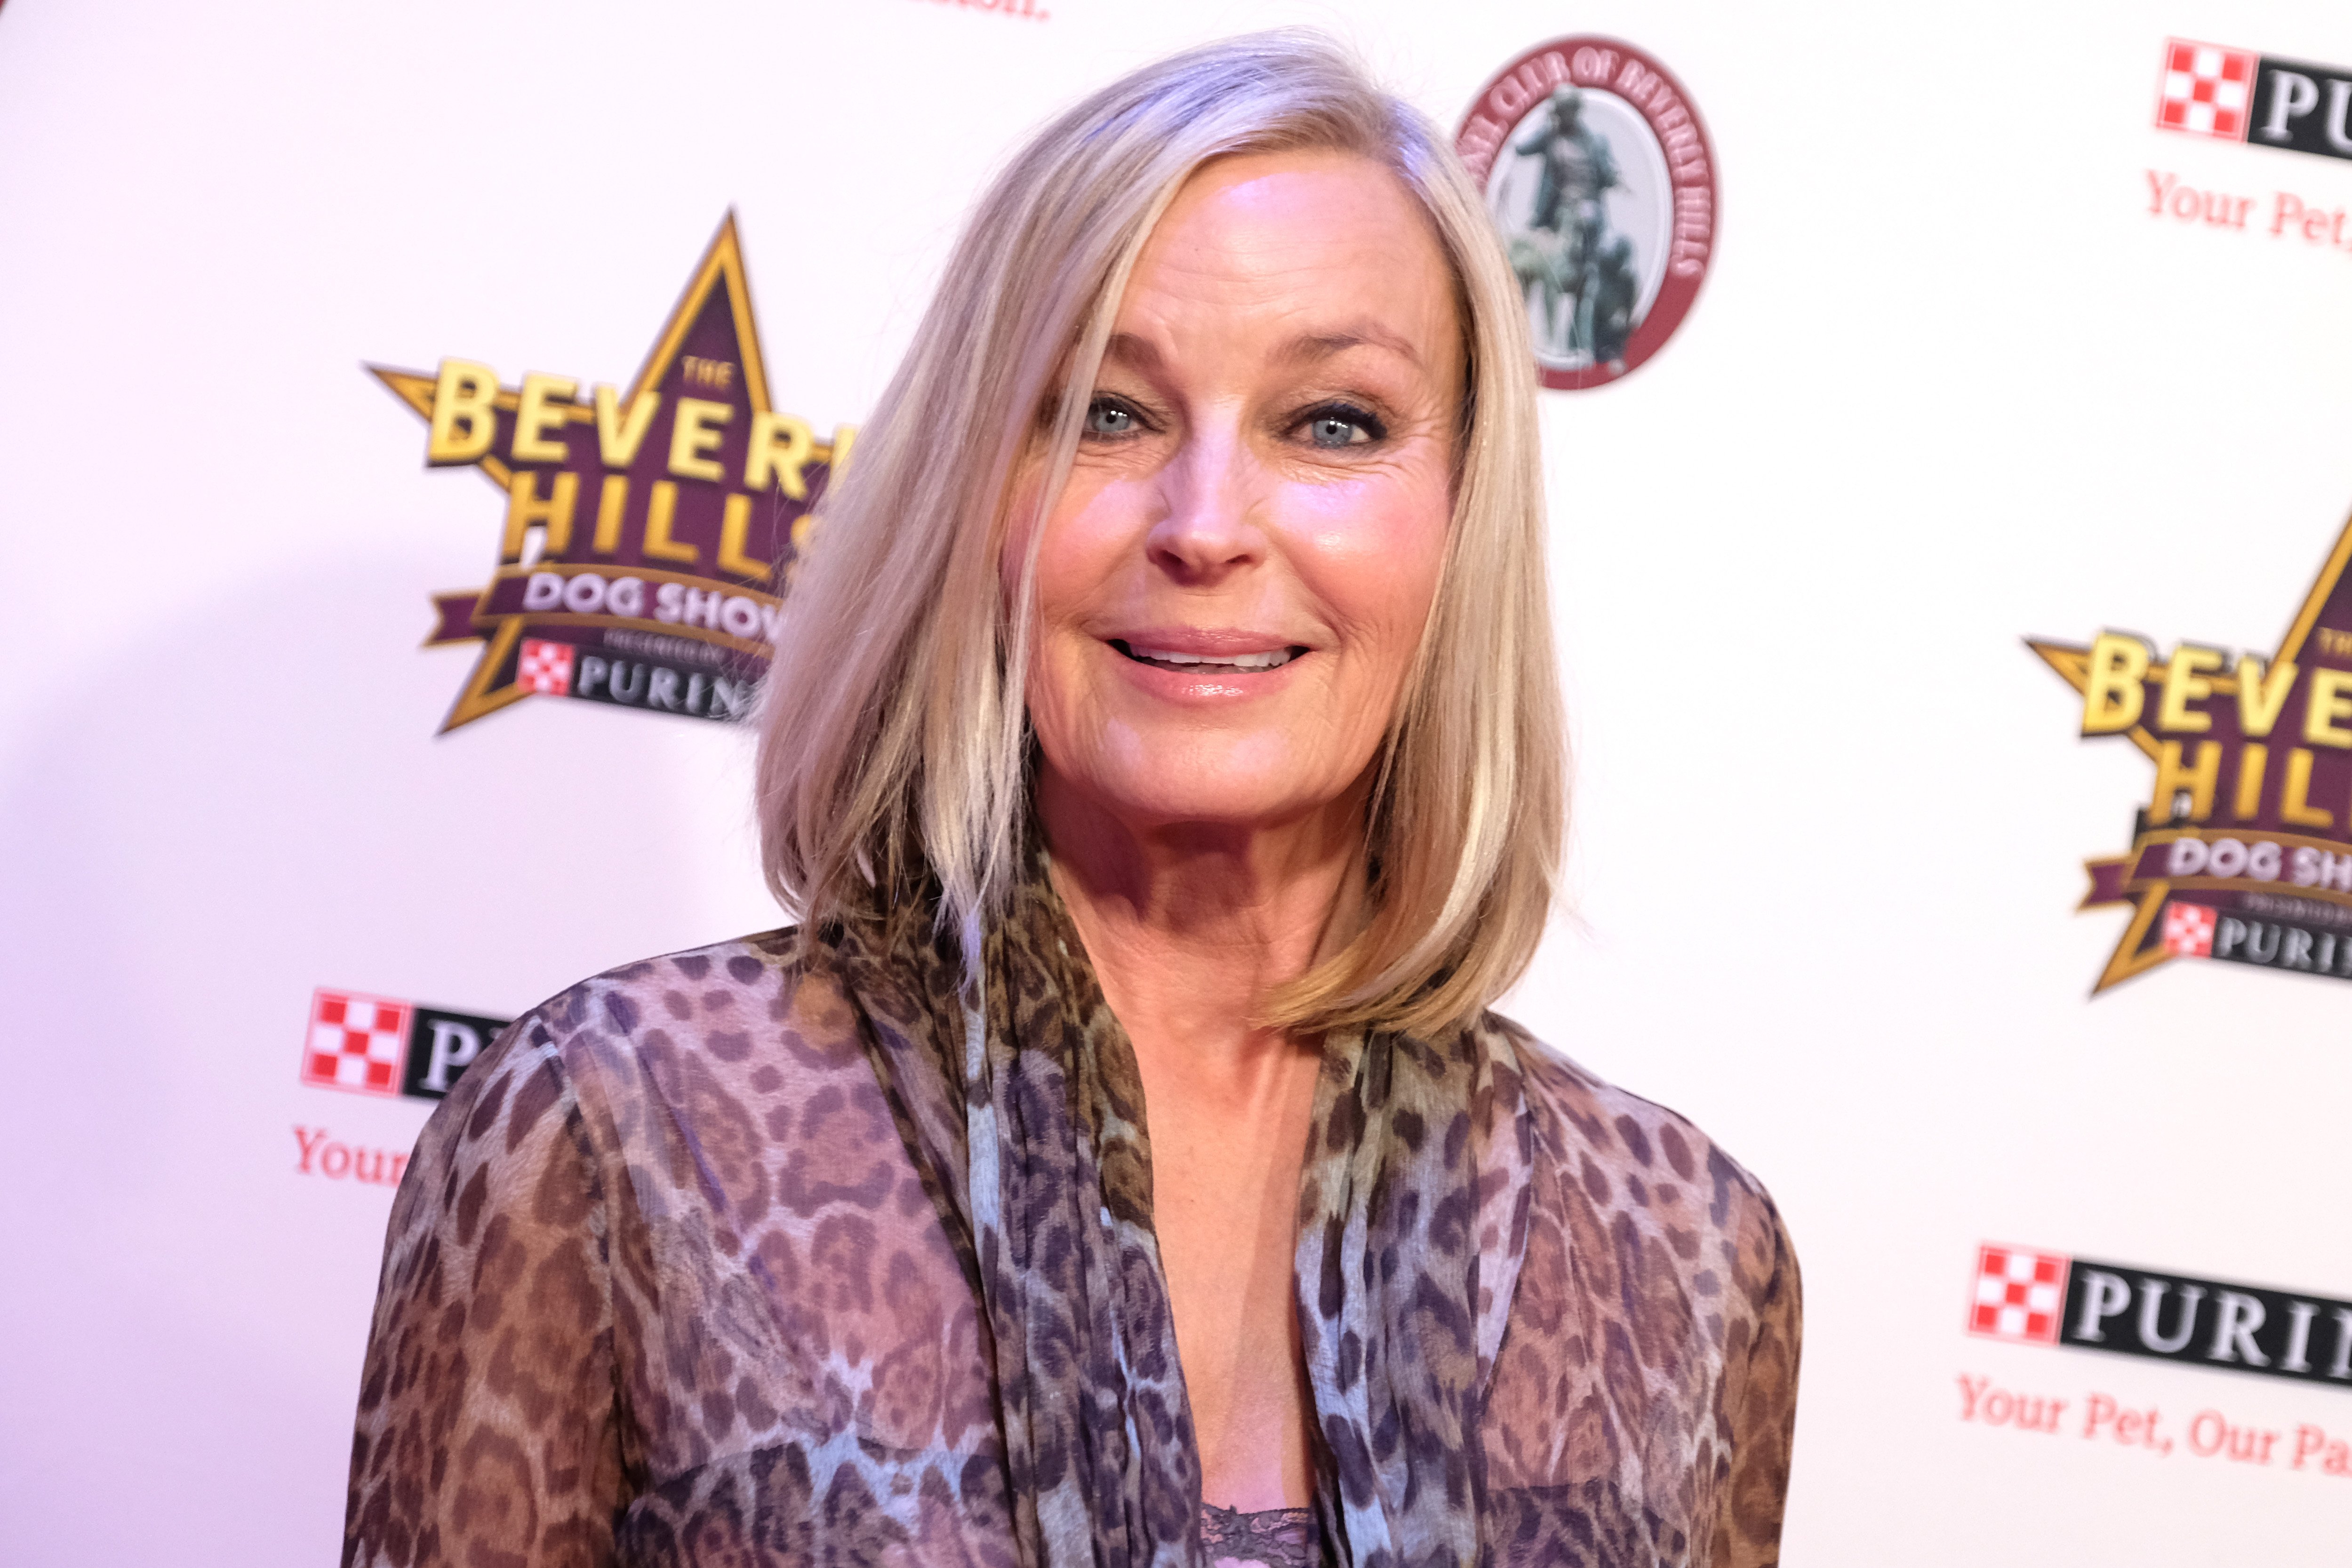 Actress Bo Derek attends the 2020 Beverly Hills Dog Show at the Los Angeles County Fairplex on February 29, 2020, in Pomona, California. | Source: Getty Images